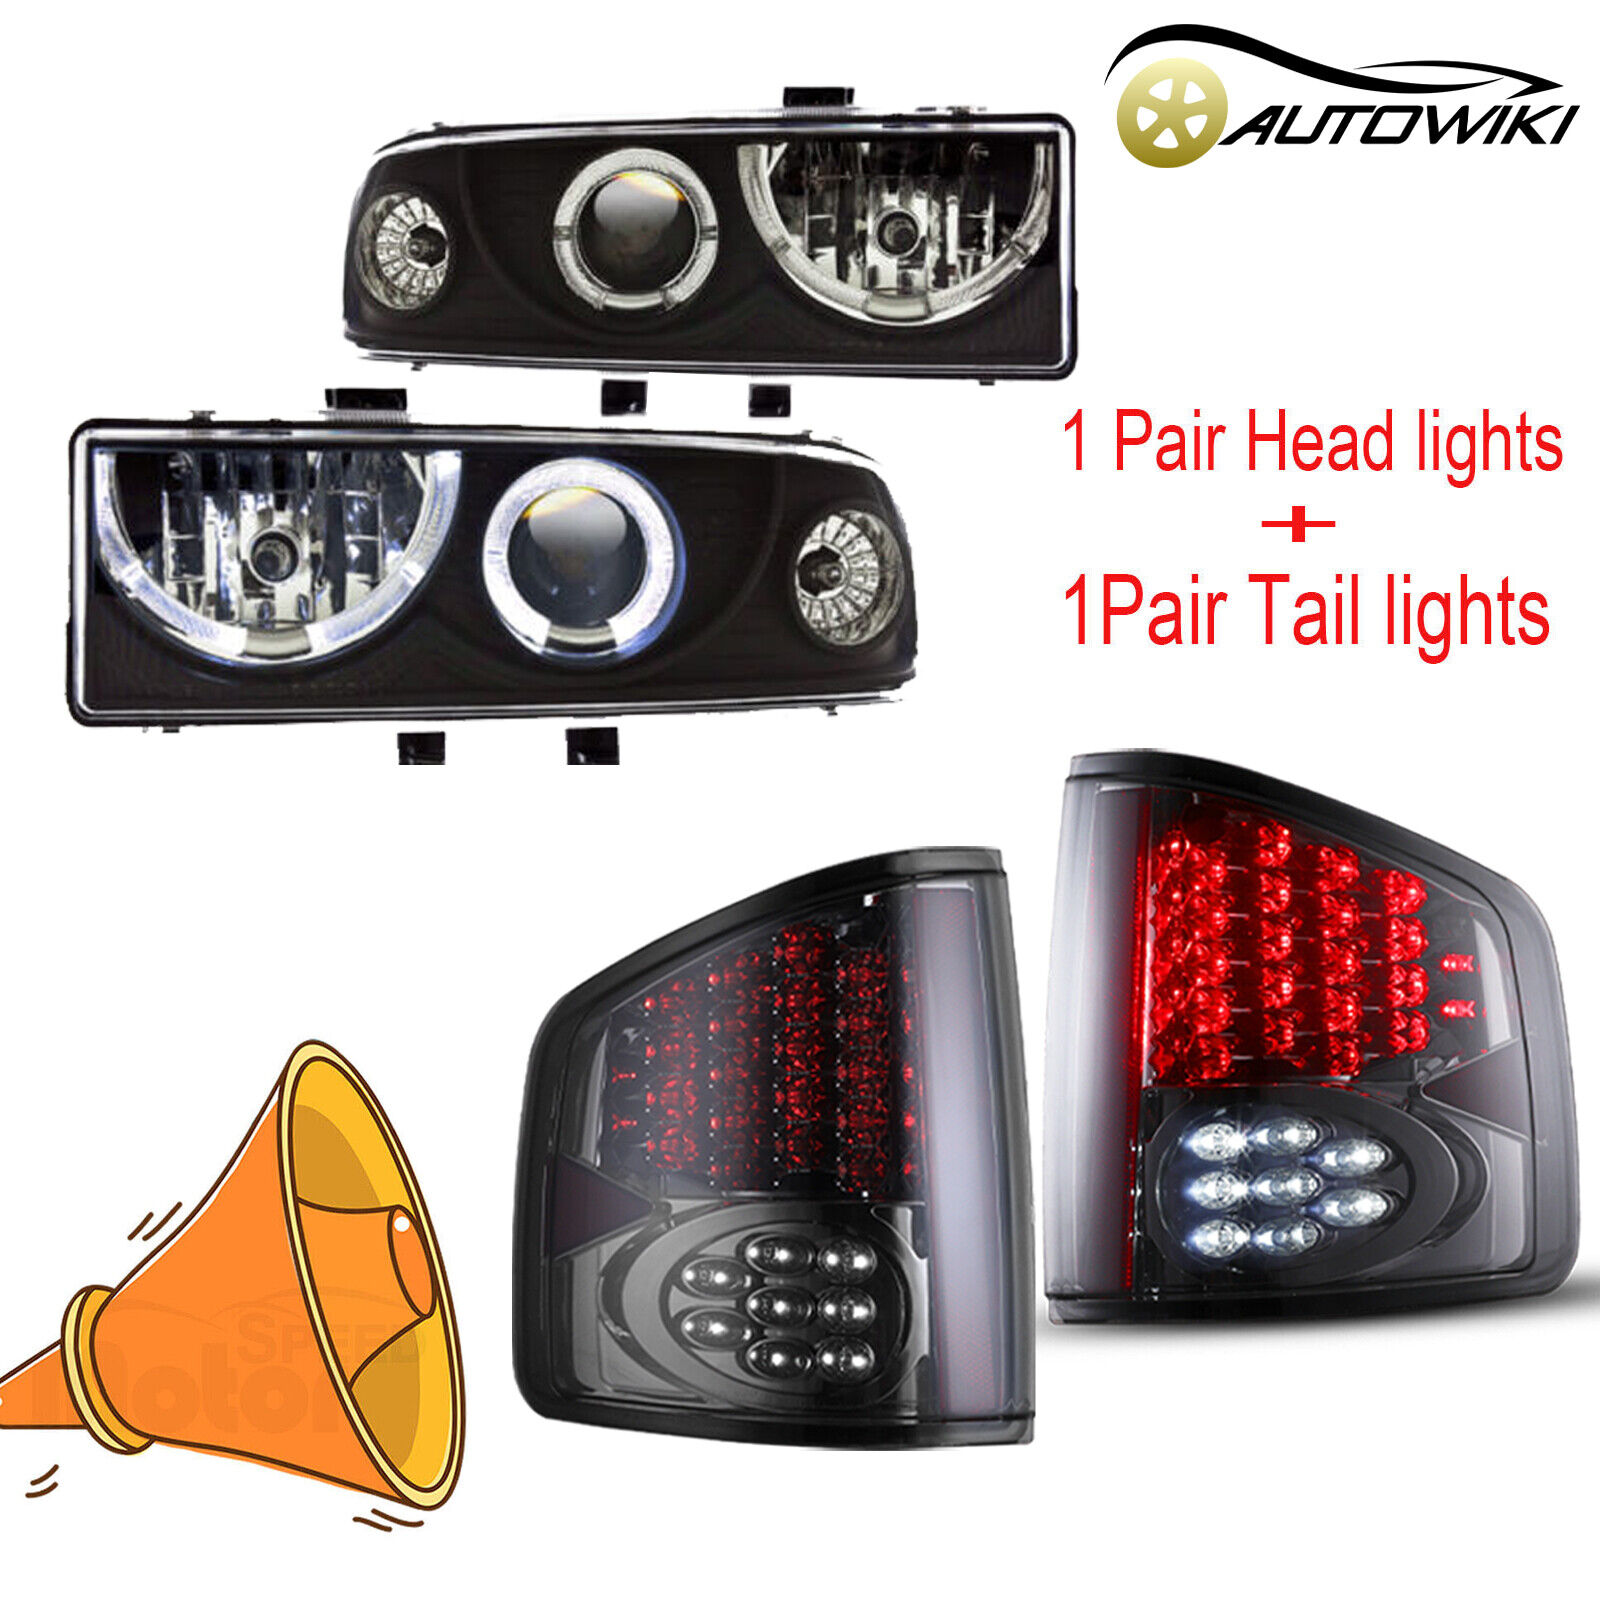 For 1998-2004 Chevy S10 Halo Projector Headlights + Smoke LED Tail lights 2 Pair